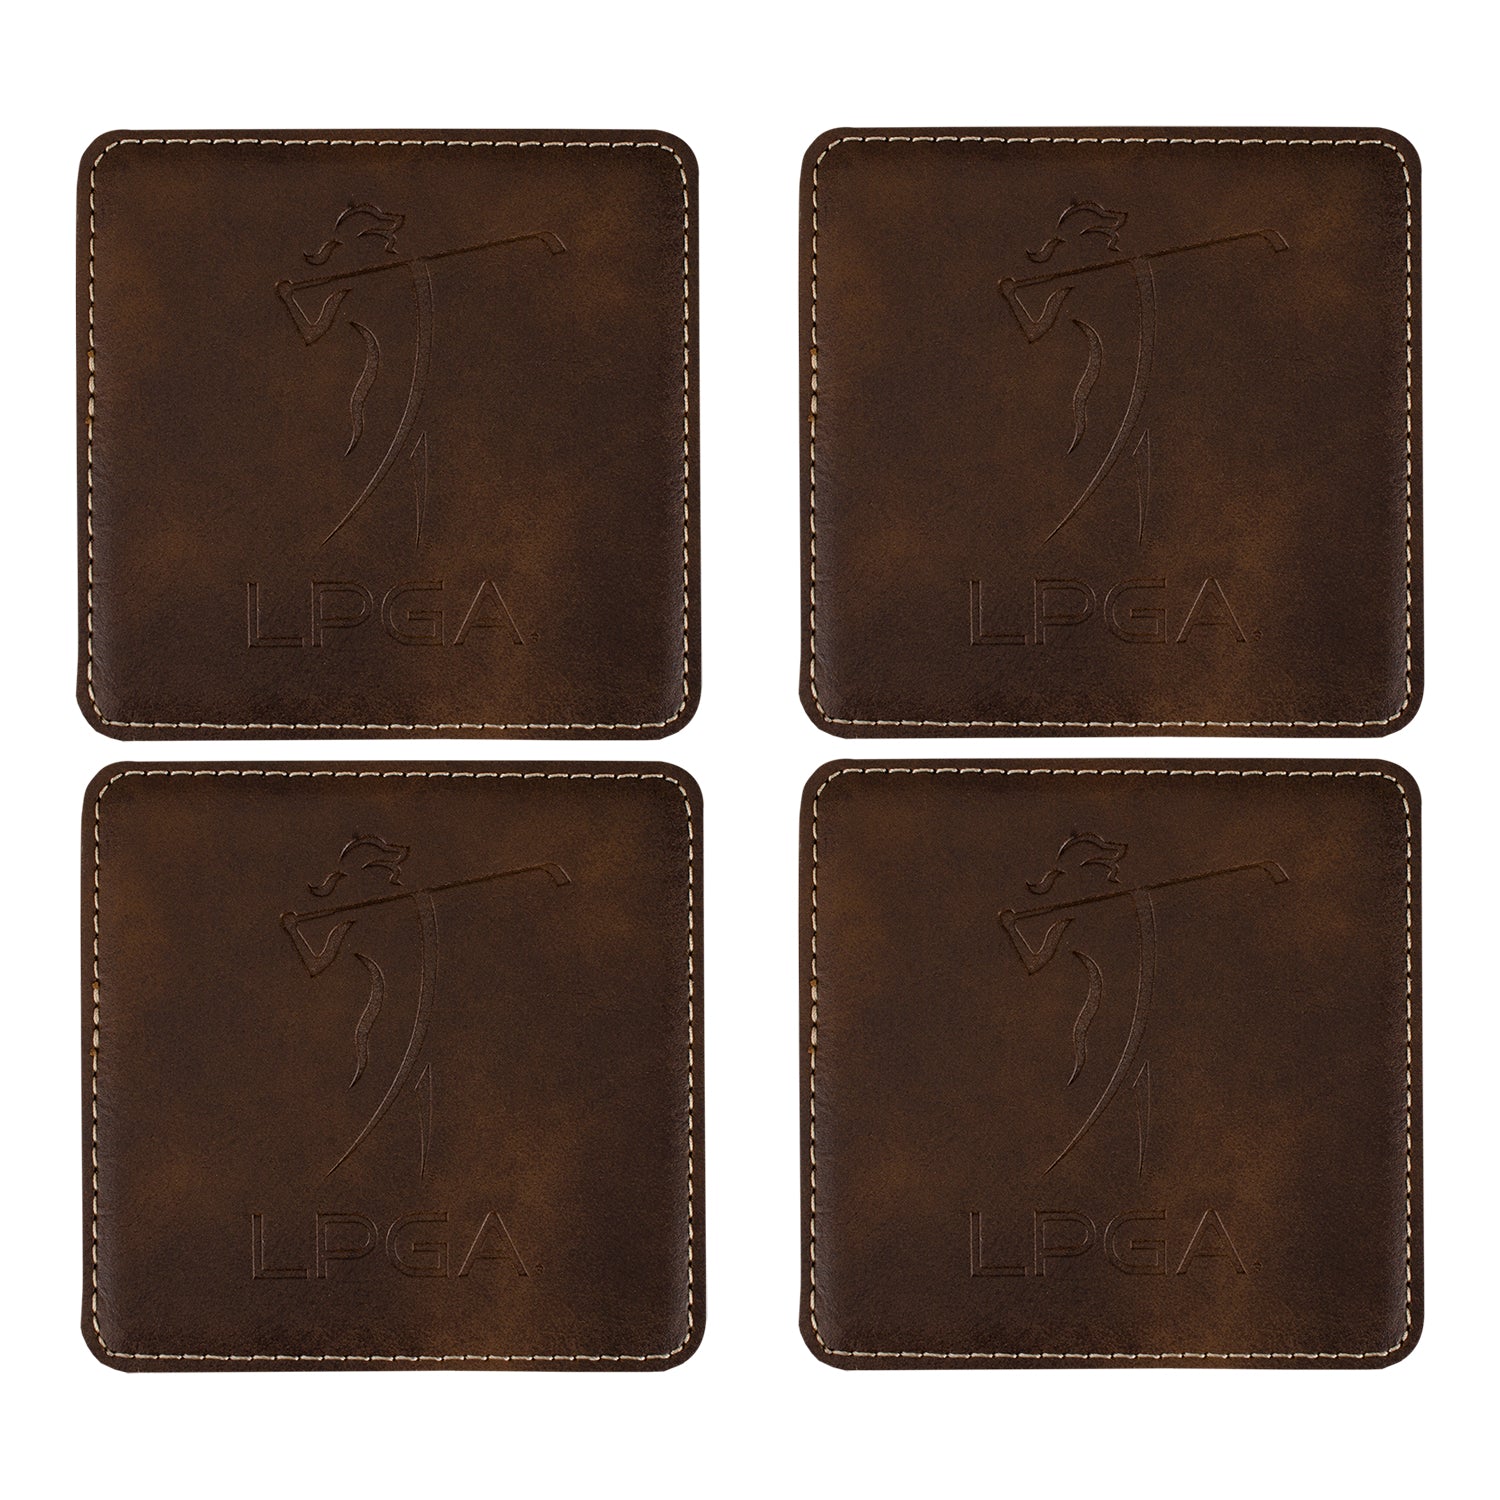 Tournament Solutions LPGA Leather Coaster - Set of 4 Front View